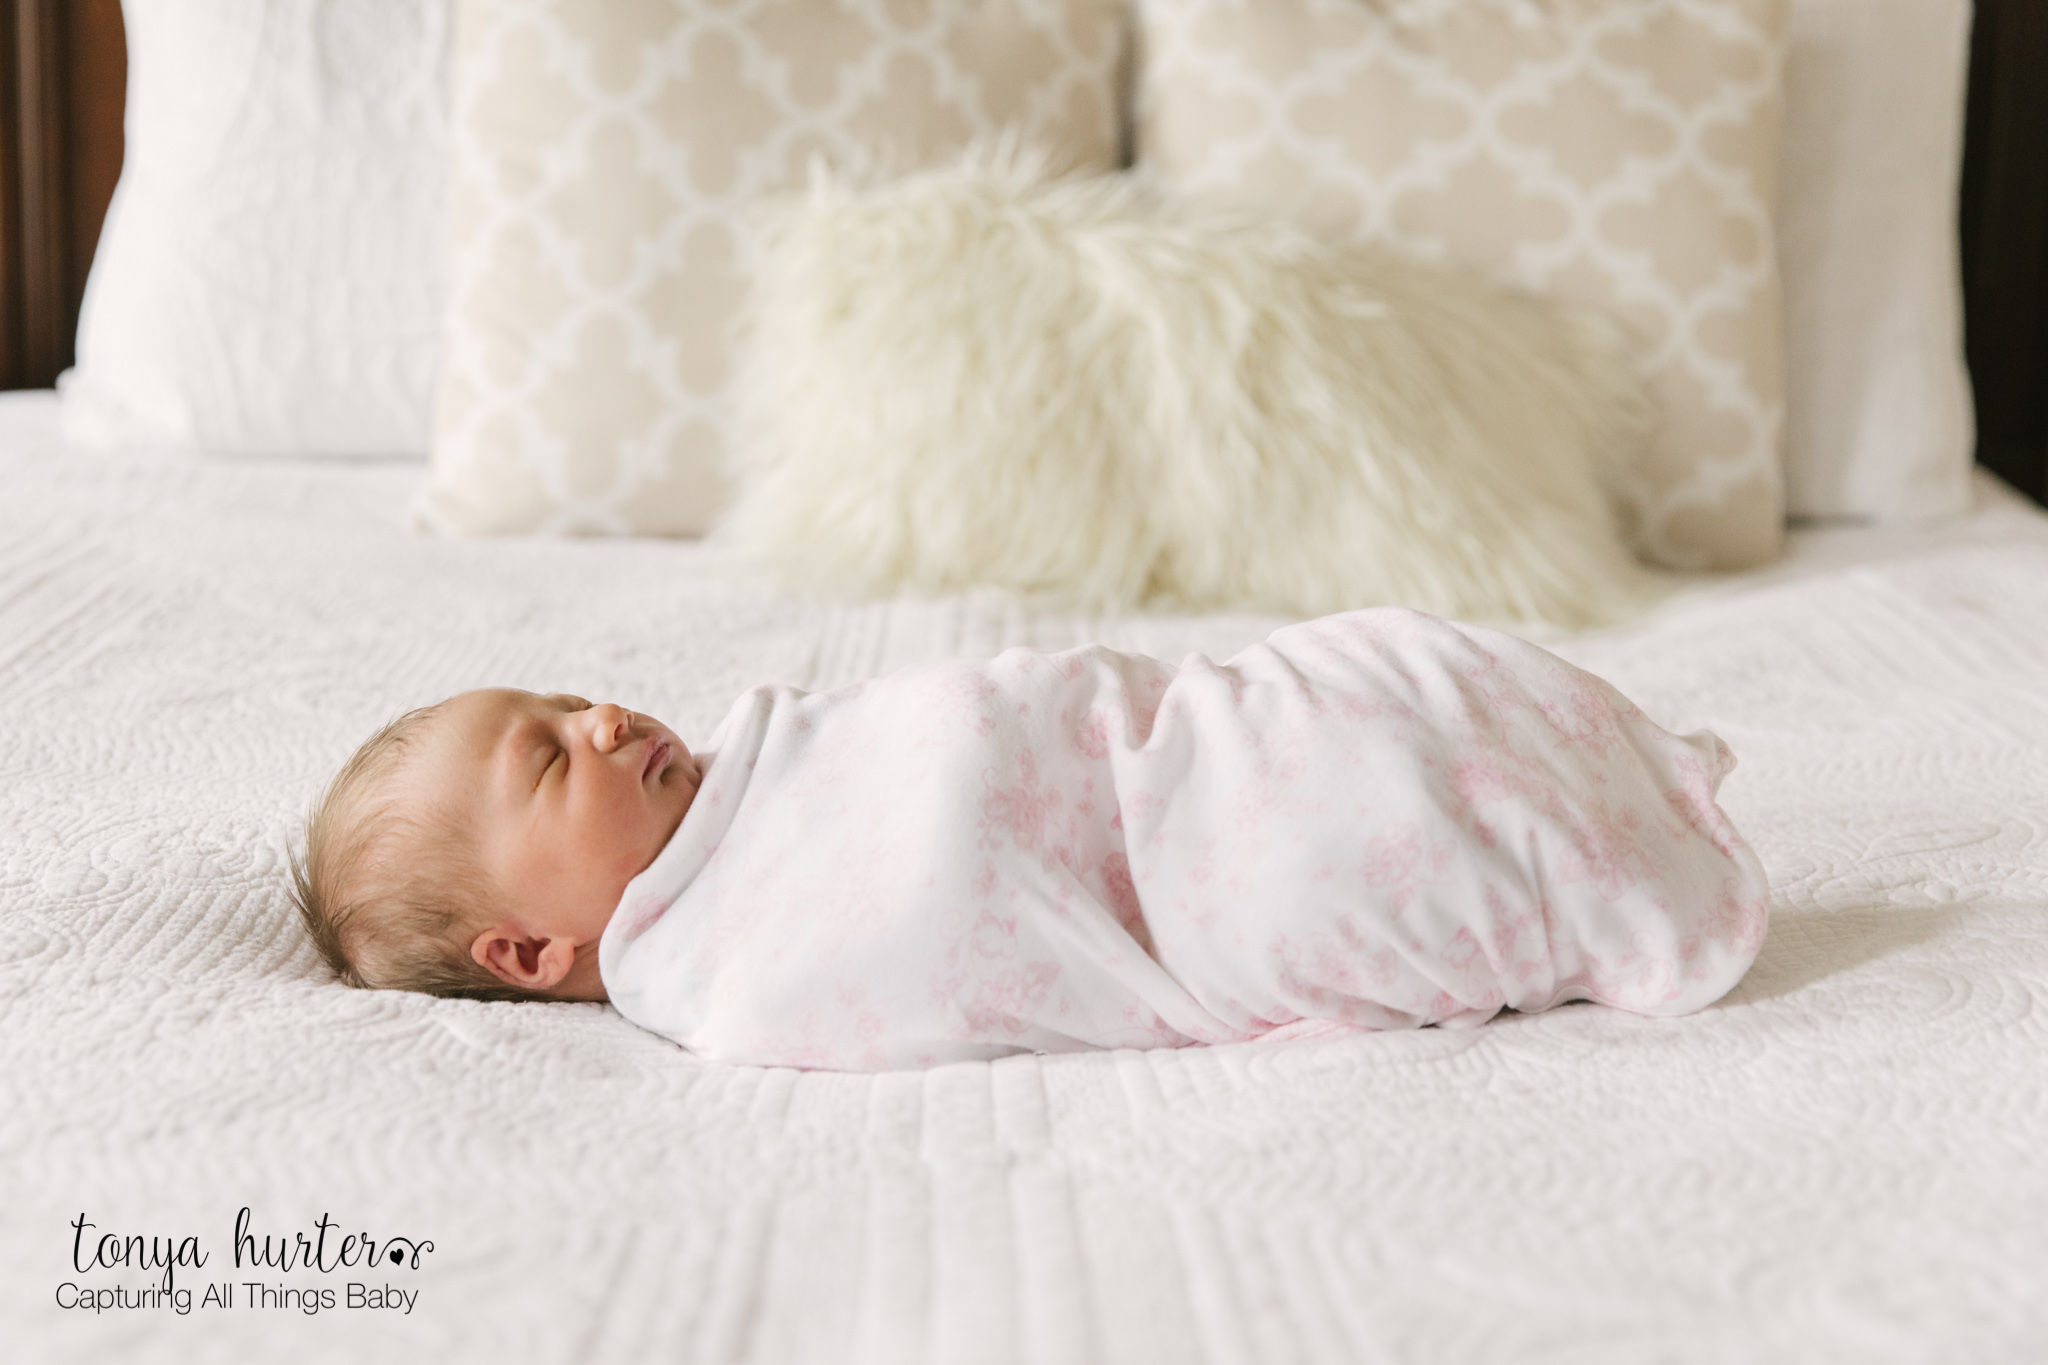 How to take newborn photos at home